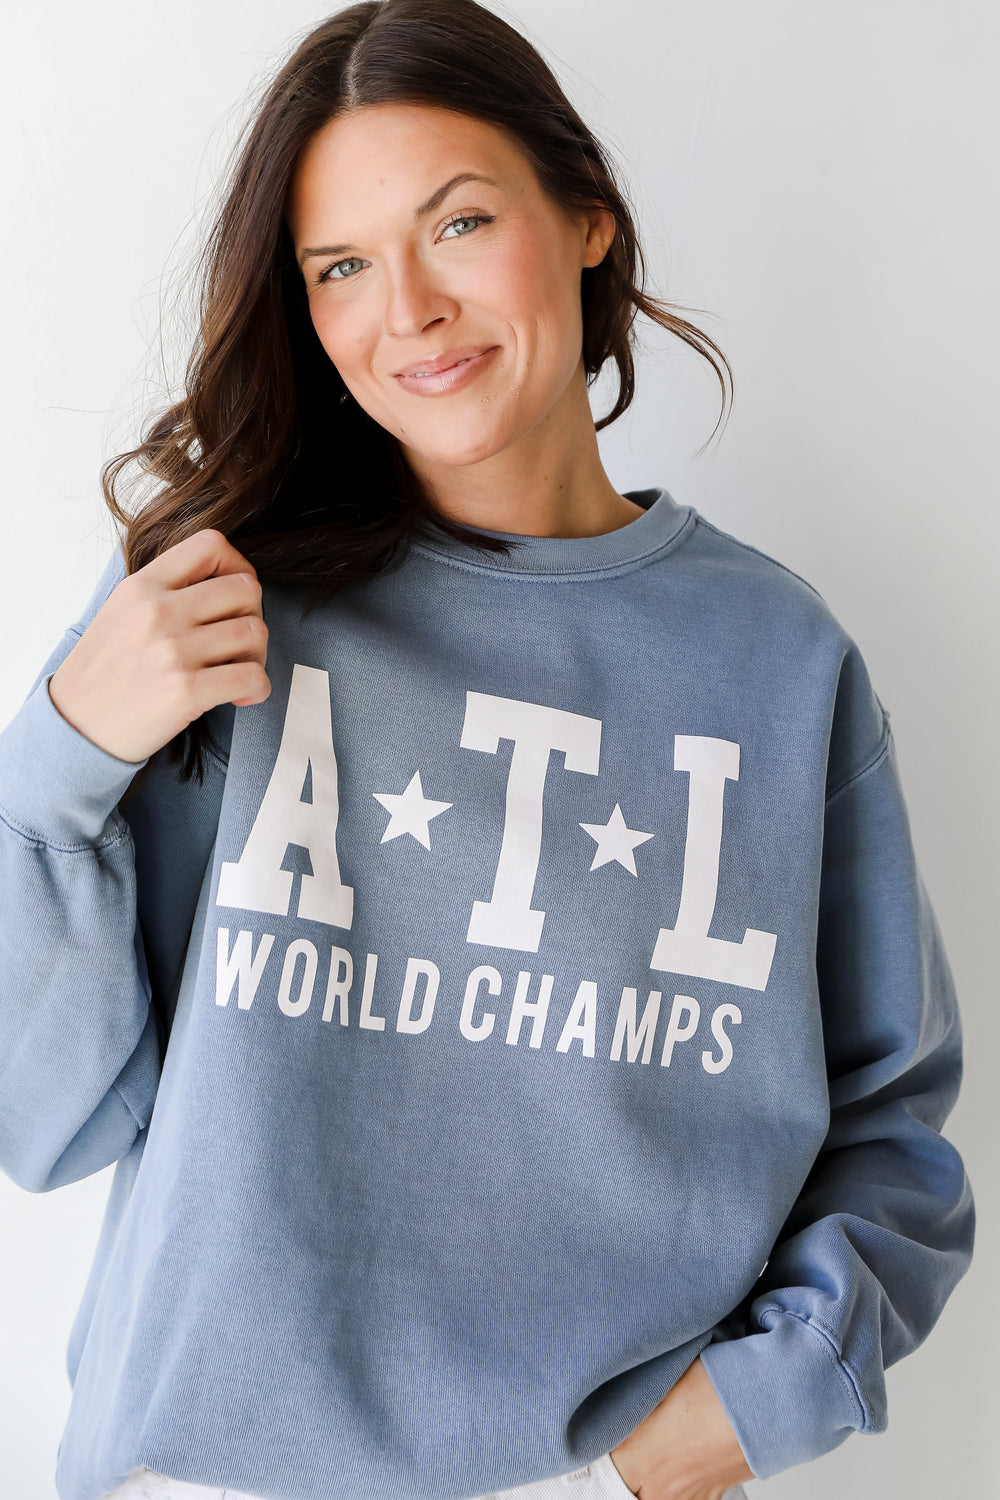 ATL World Champs Pullover from dress up